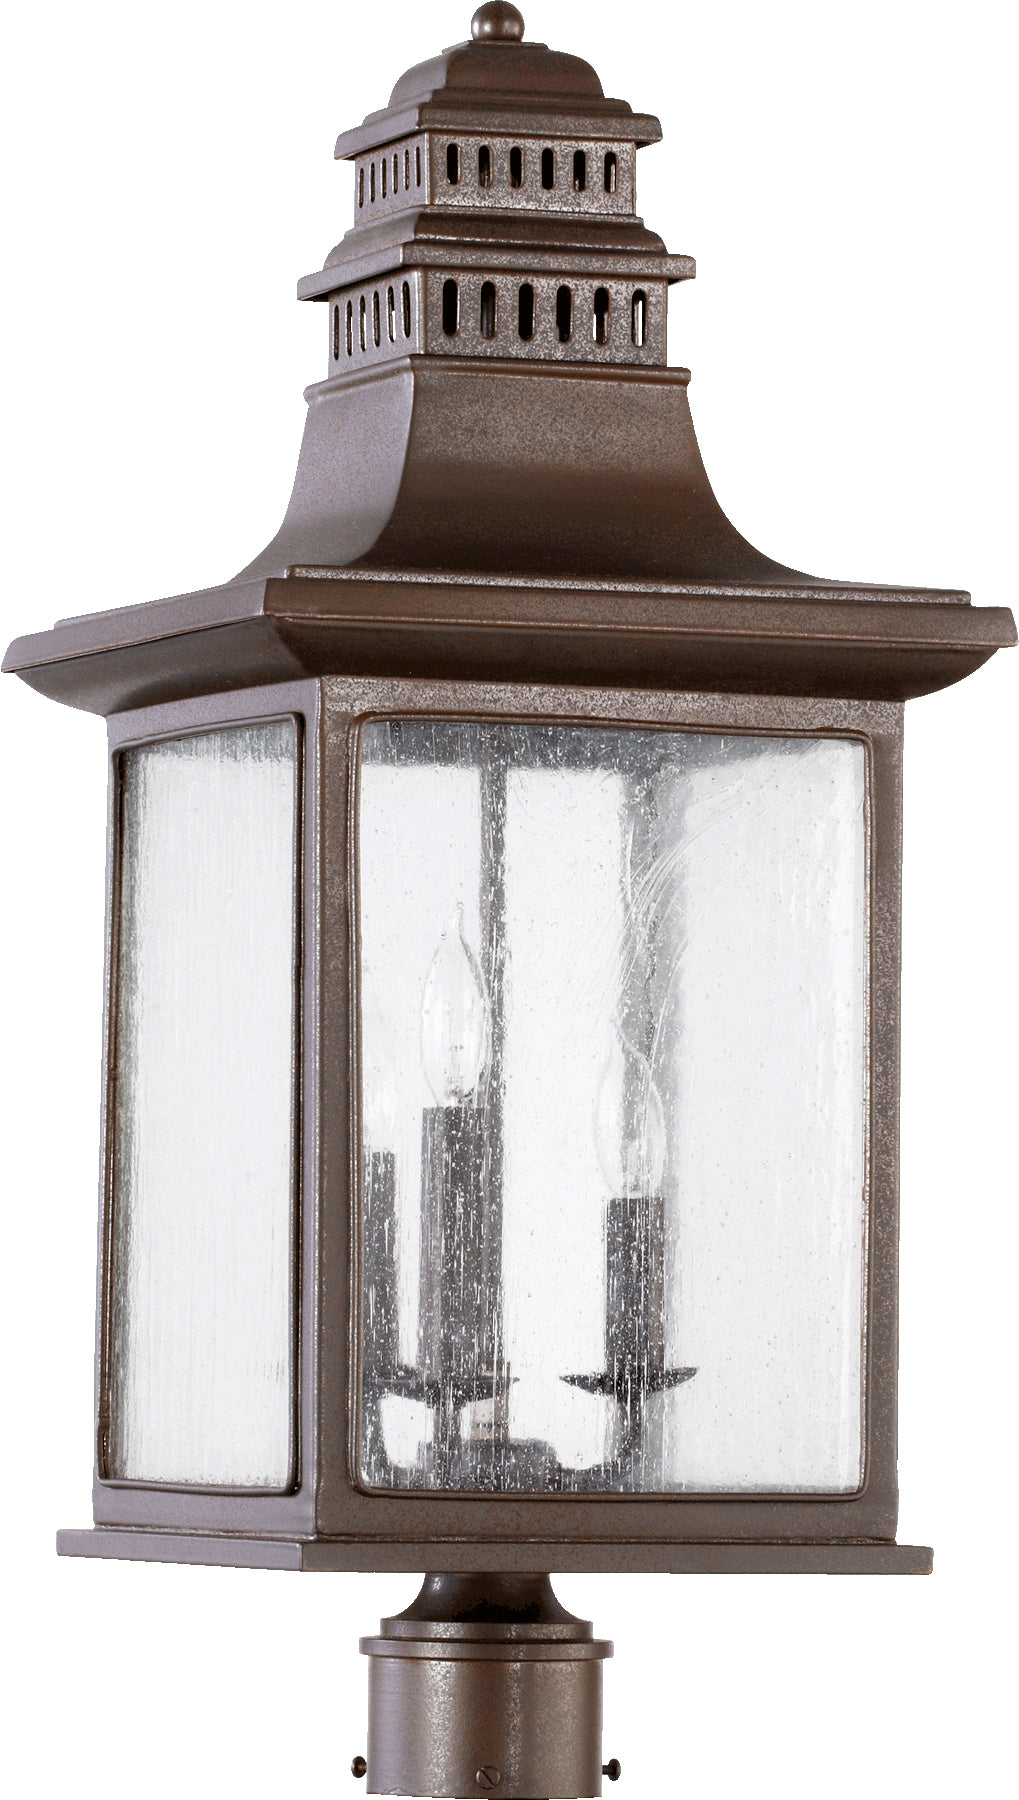 Magnolia Oiled Bronze Traditional Outdoor Post Light